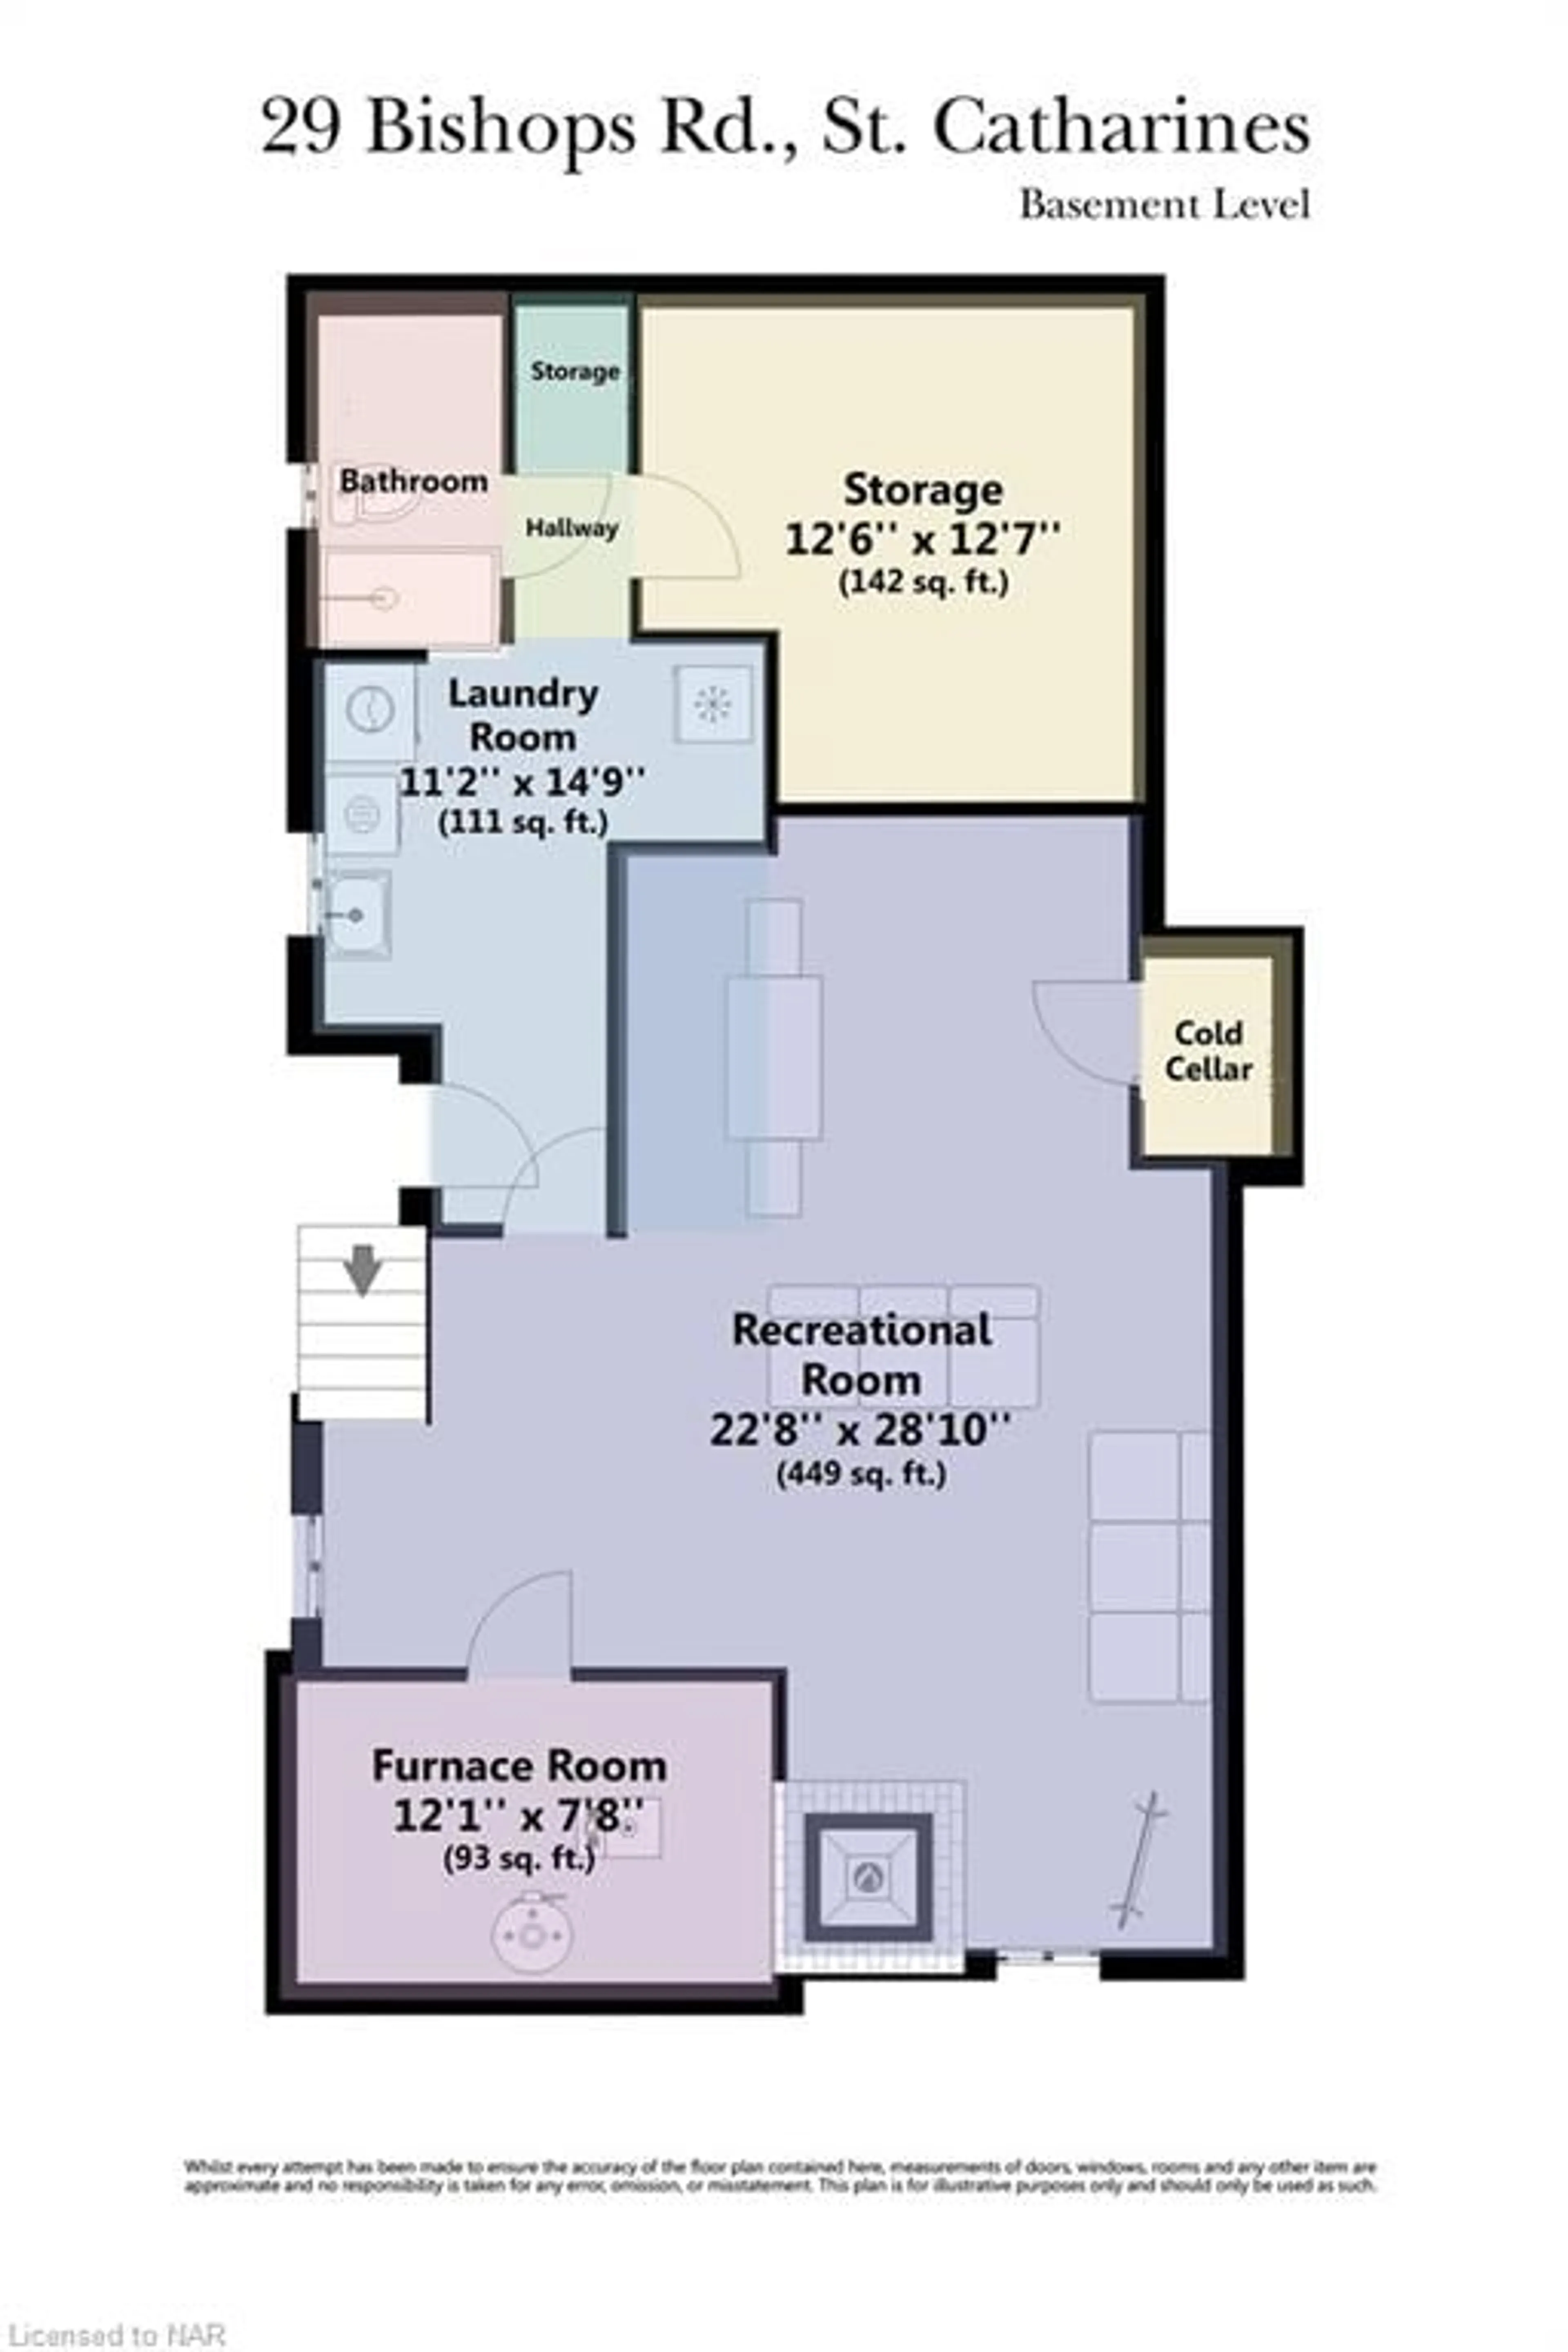 Floor plan for 29 Bishops Rd, St. Catharines Ontario L2M 1T8